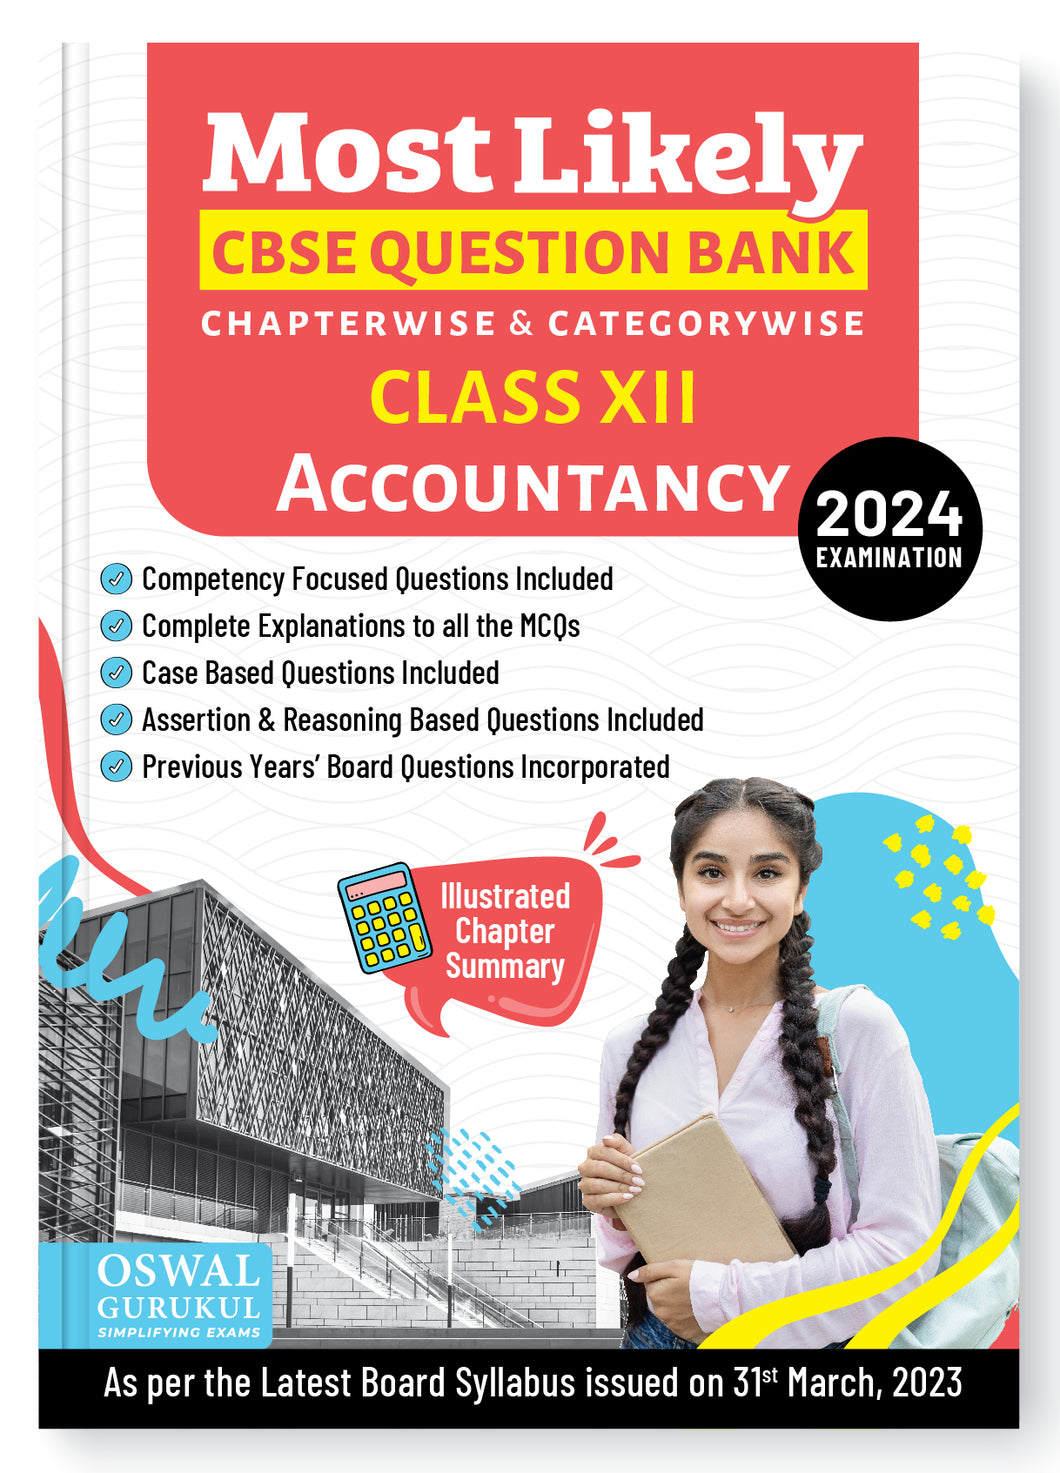 Oswal - Gurukul Accountancy Most Likely Question Bank : CBSE Class 12 for 2024 Exam